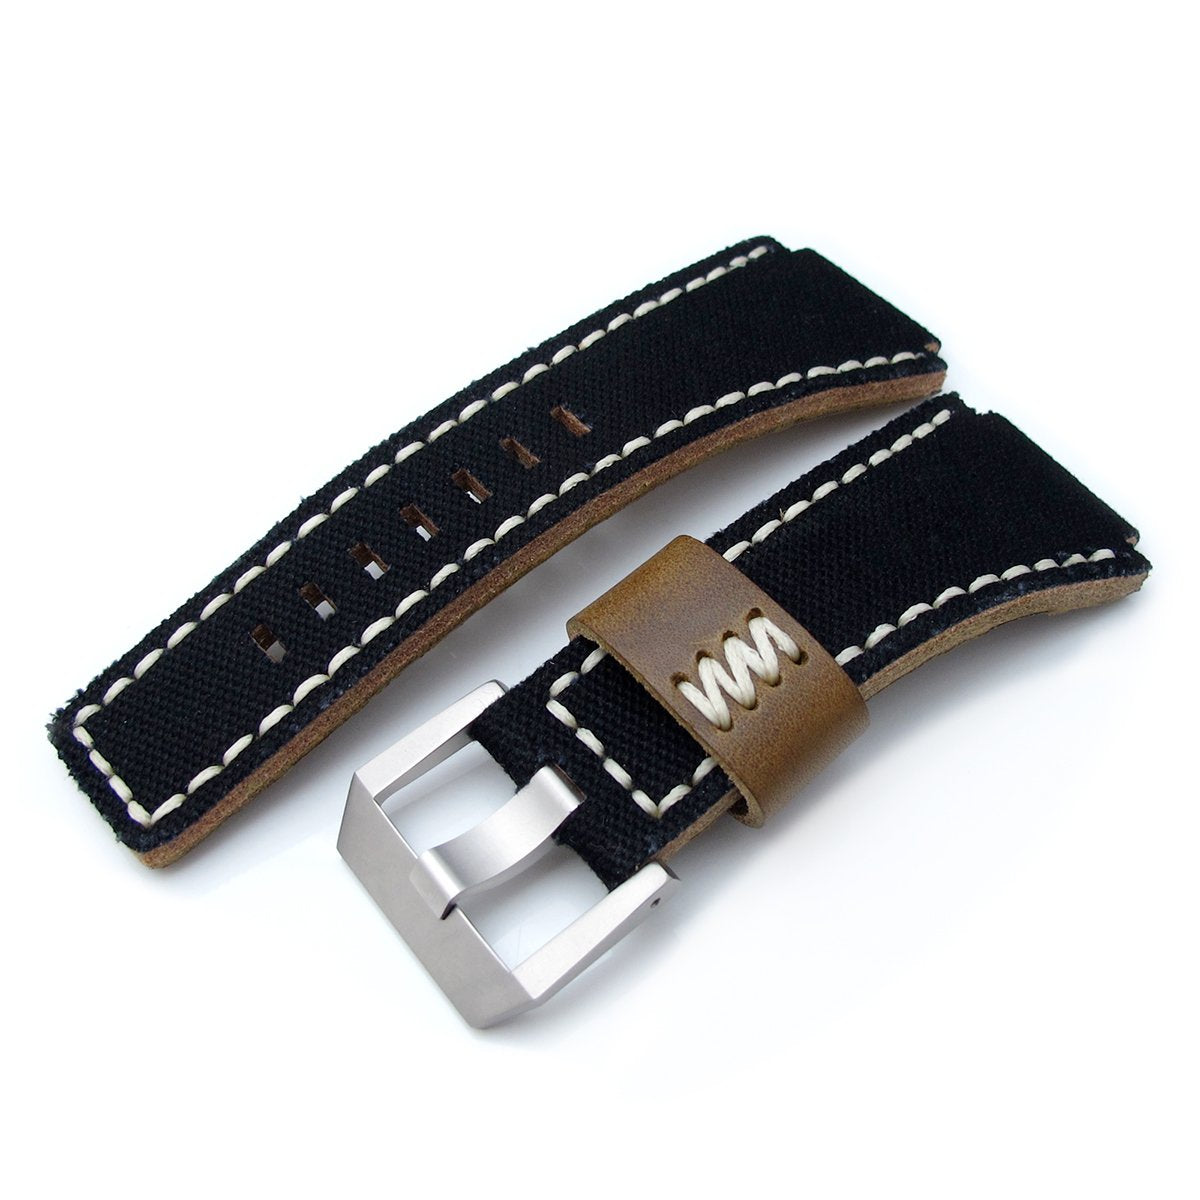 MiLTAT Black Canvas Bell & Ross BR01 Type Replacement Watch Strap Beige Wax Stitching Strapcode Watch Bands